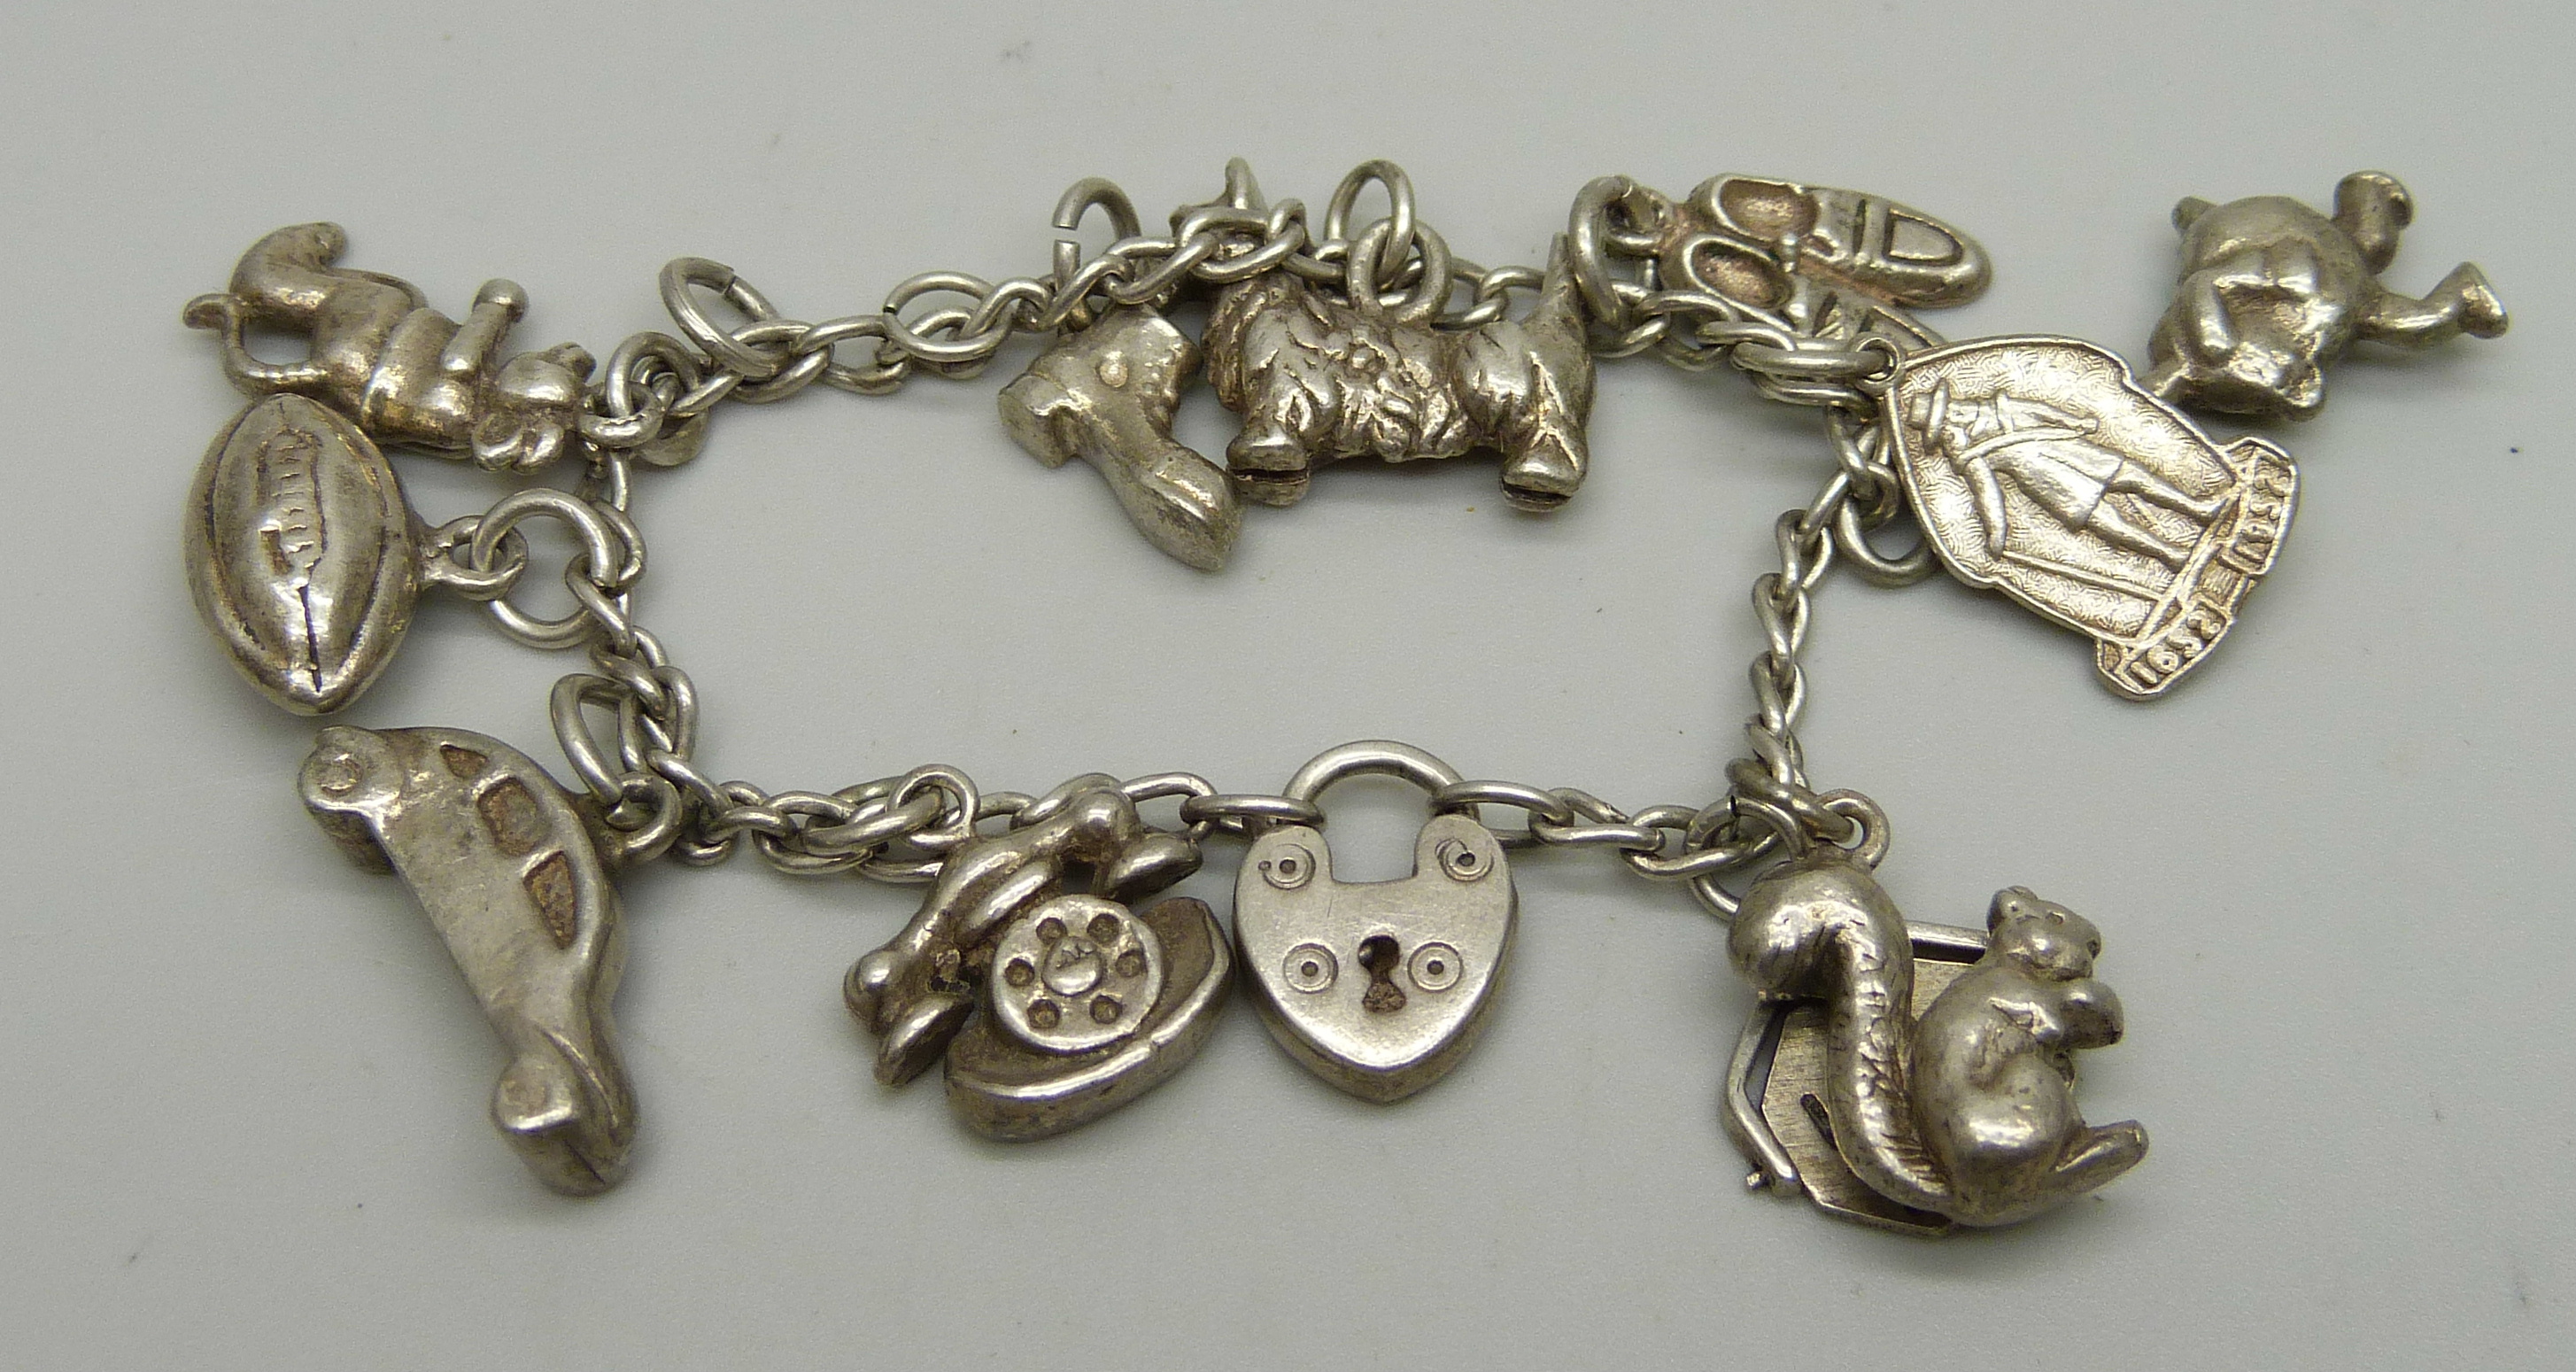 A small silver charm bracelet with nine charms, 42.6g